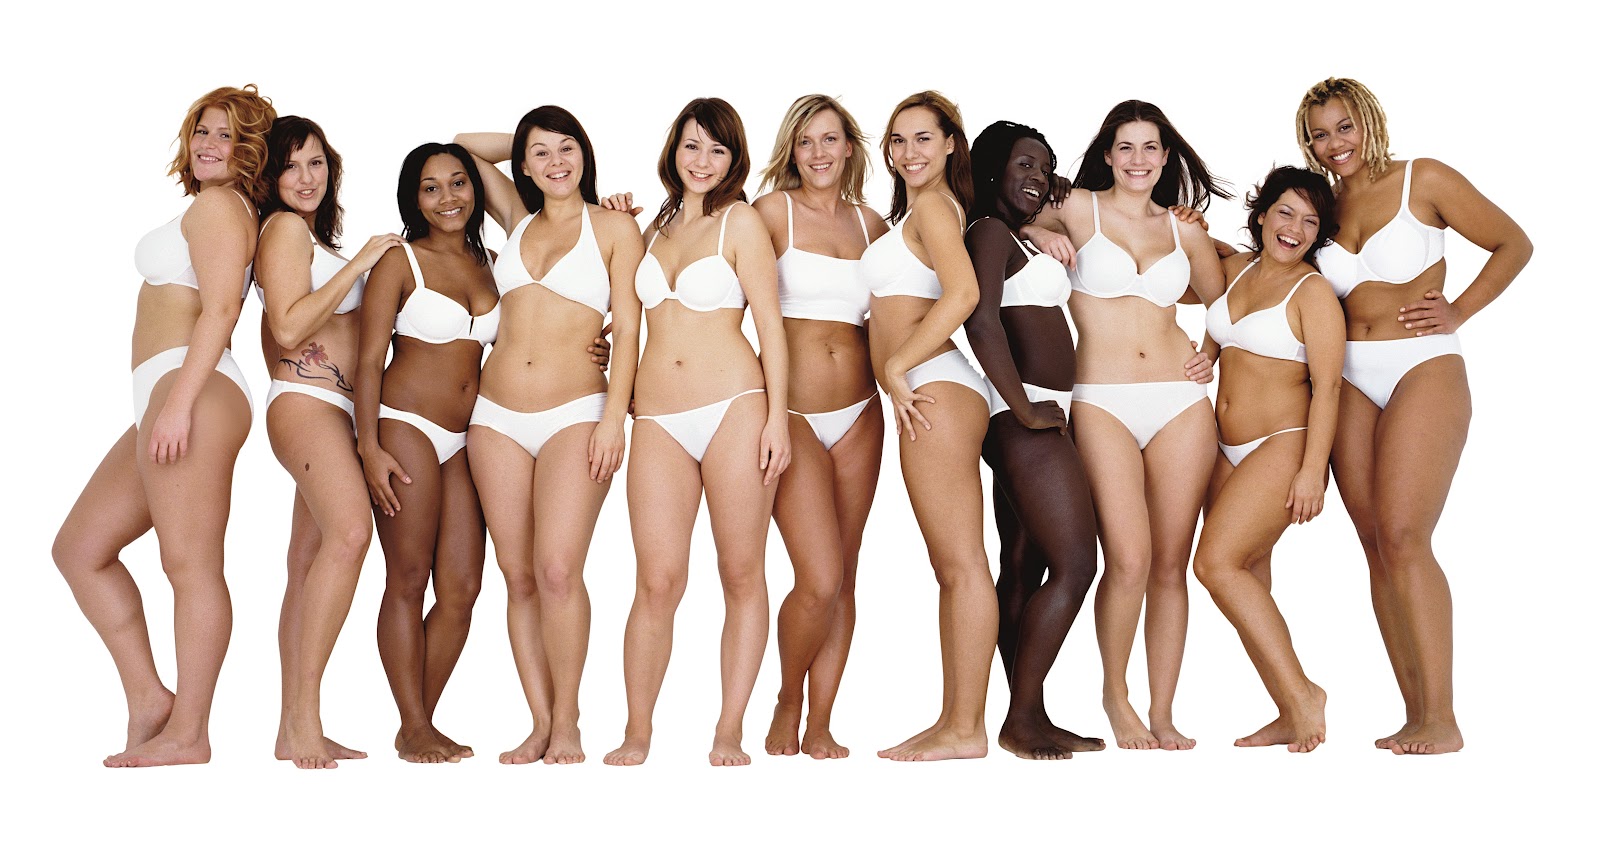 Image from Dove's Real Beauty Campaign. Unconventional models of various body types, ages, and races stand, smiling, against a white background